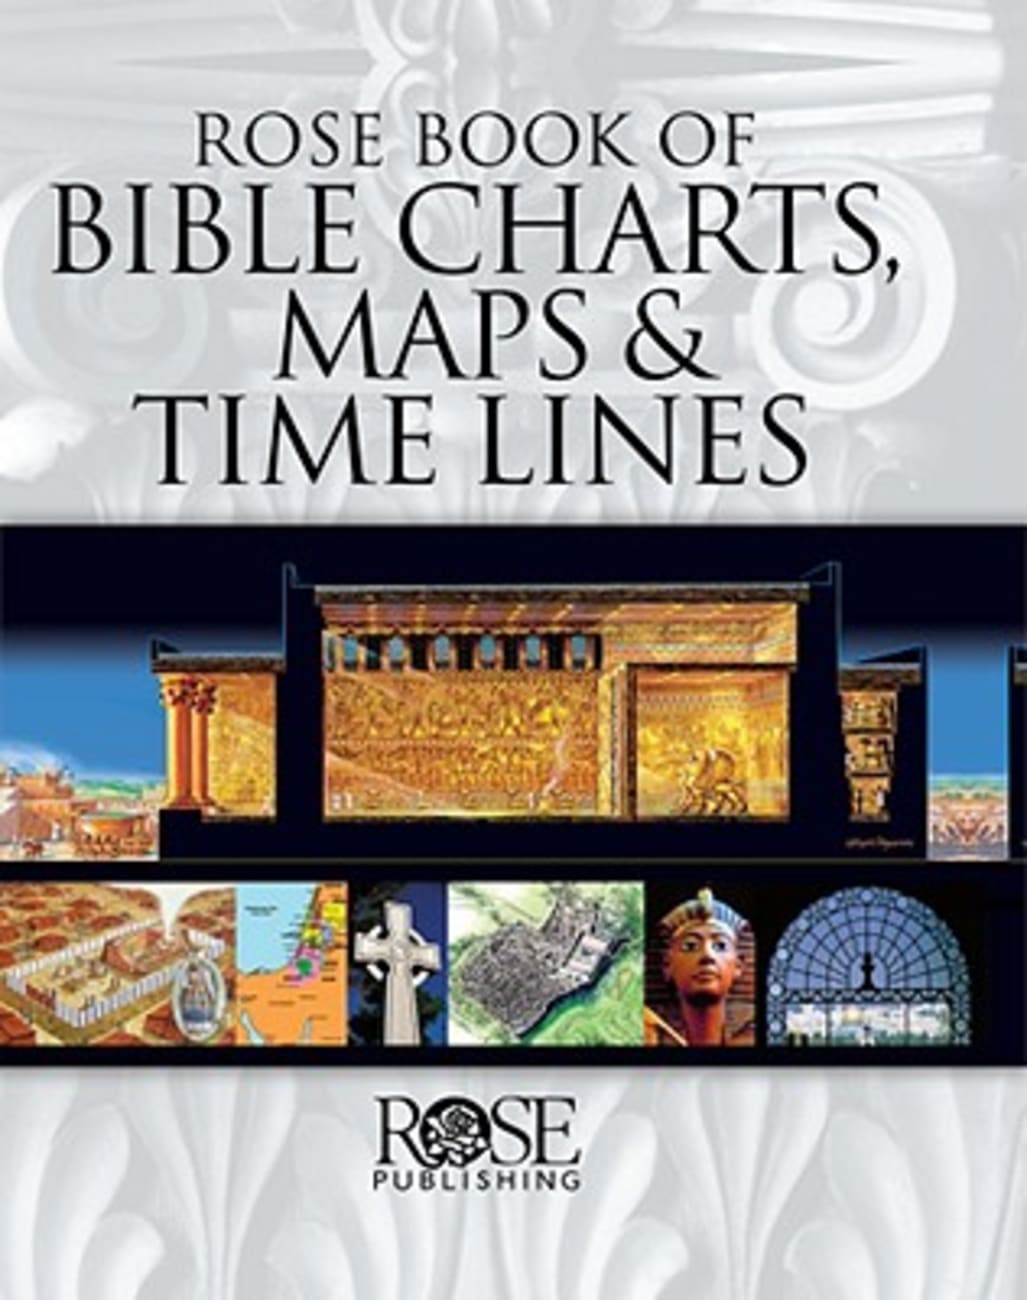 Rose Book of Bible Charts, Maps and Time Lines 10Th Anniversary Expanded Edition (Volume 1) (#1 in Rose Book Of Bible Charts Series) Hardback